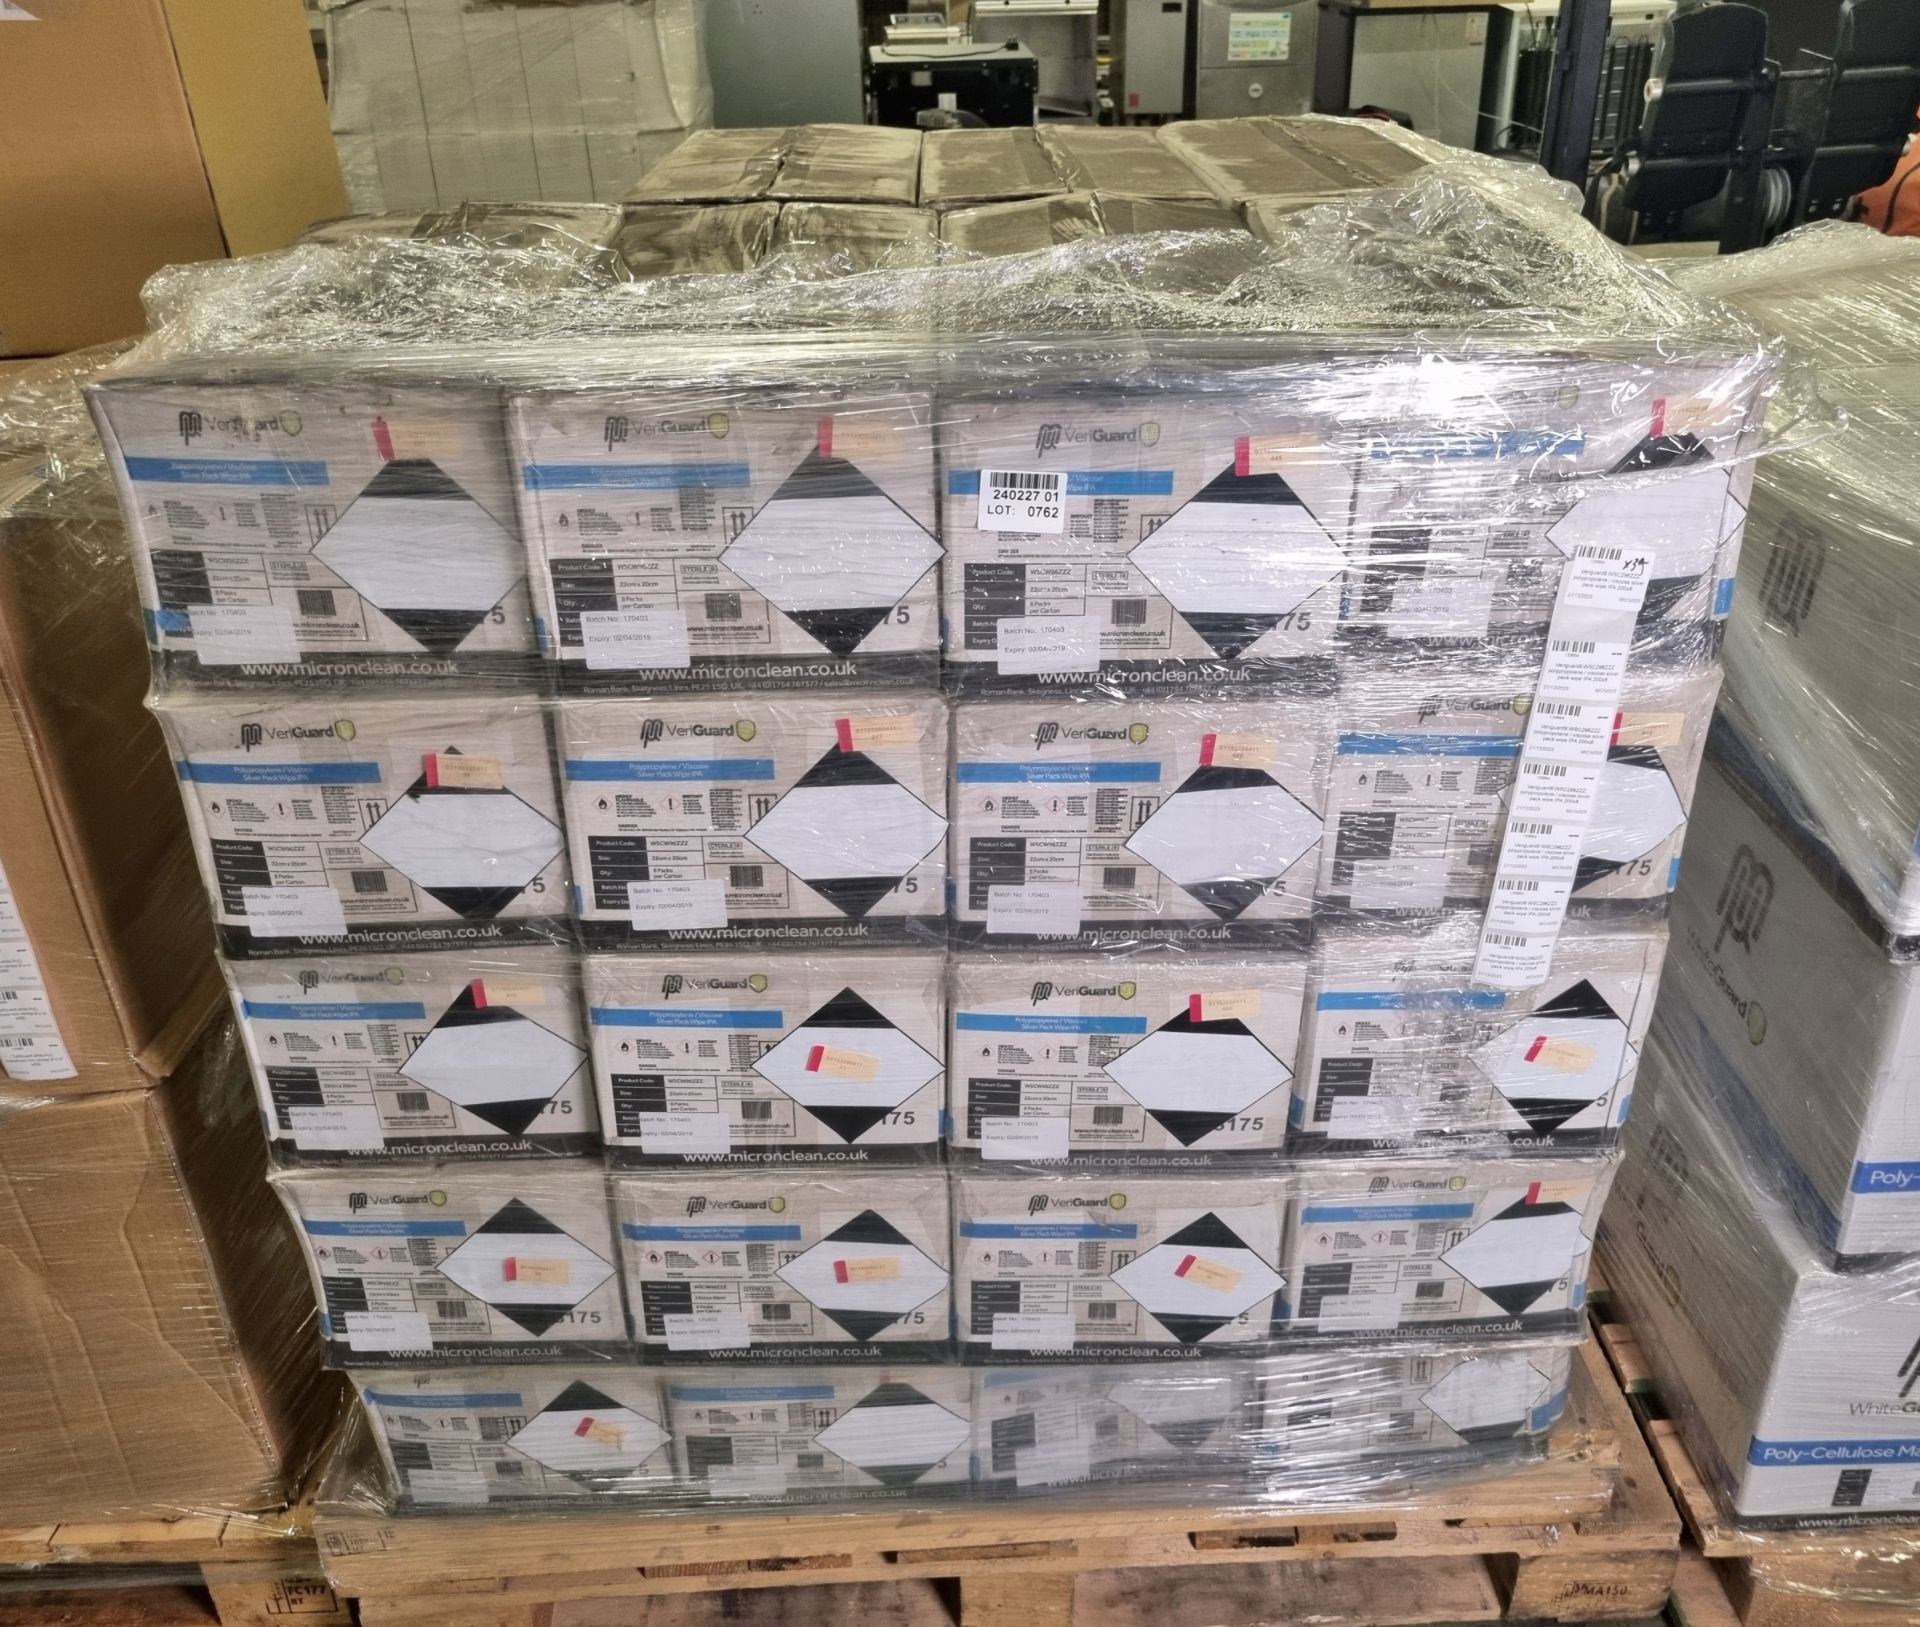 39x boxes of Veriguard9 WSC296ZZZ polypropylene / viscose silver pack wipe IPA - 200x8 per box - Image 4 of 4